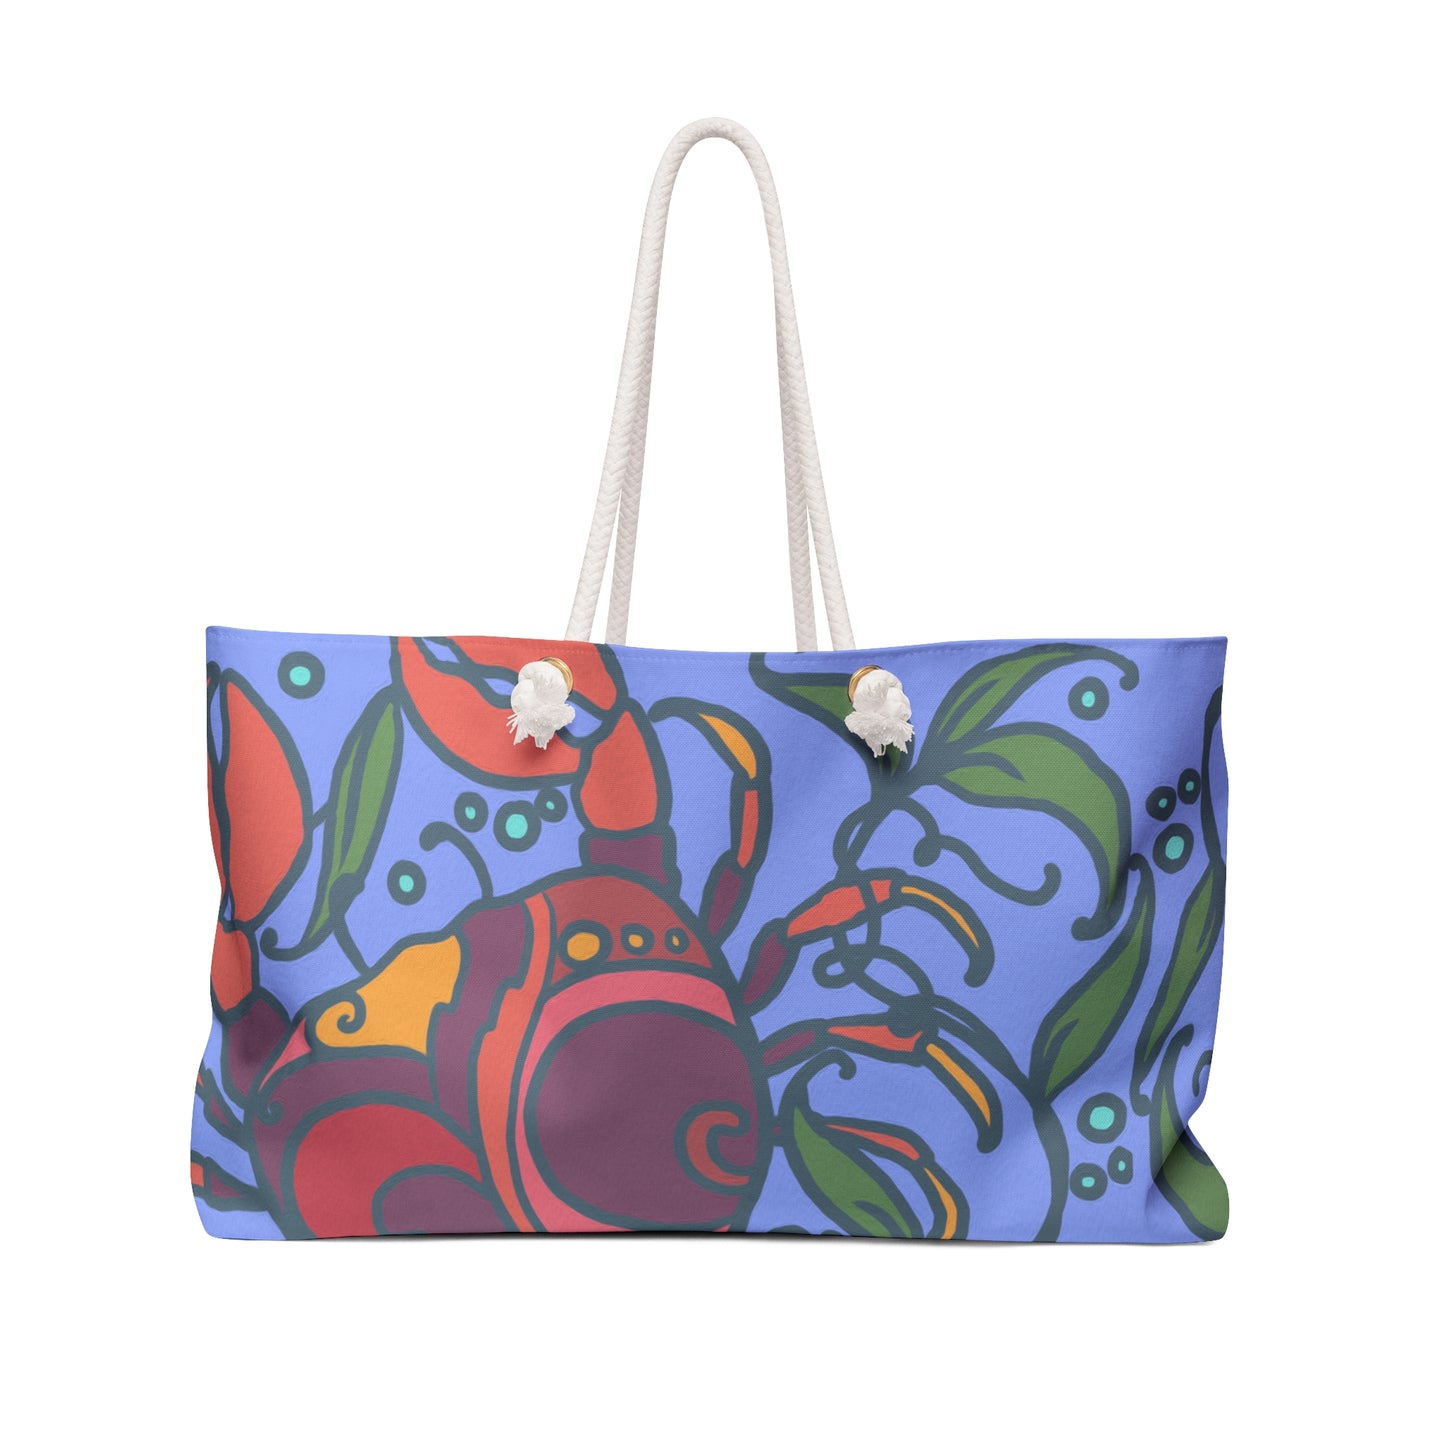 Crabs on Periwinkle Weekender Bag from Talula Land